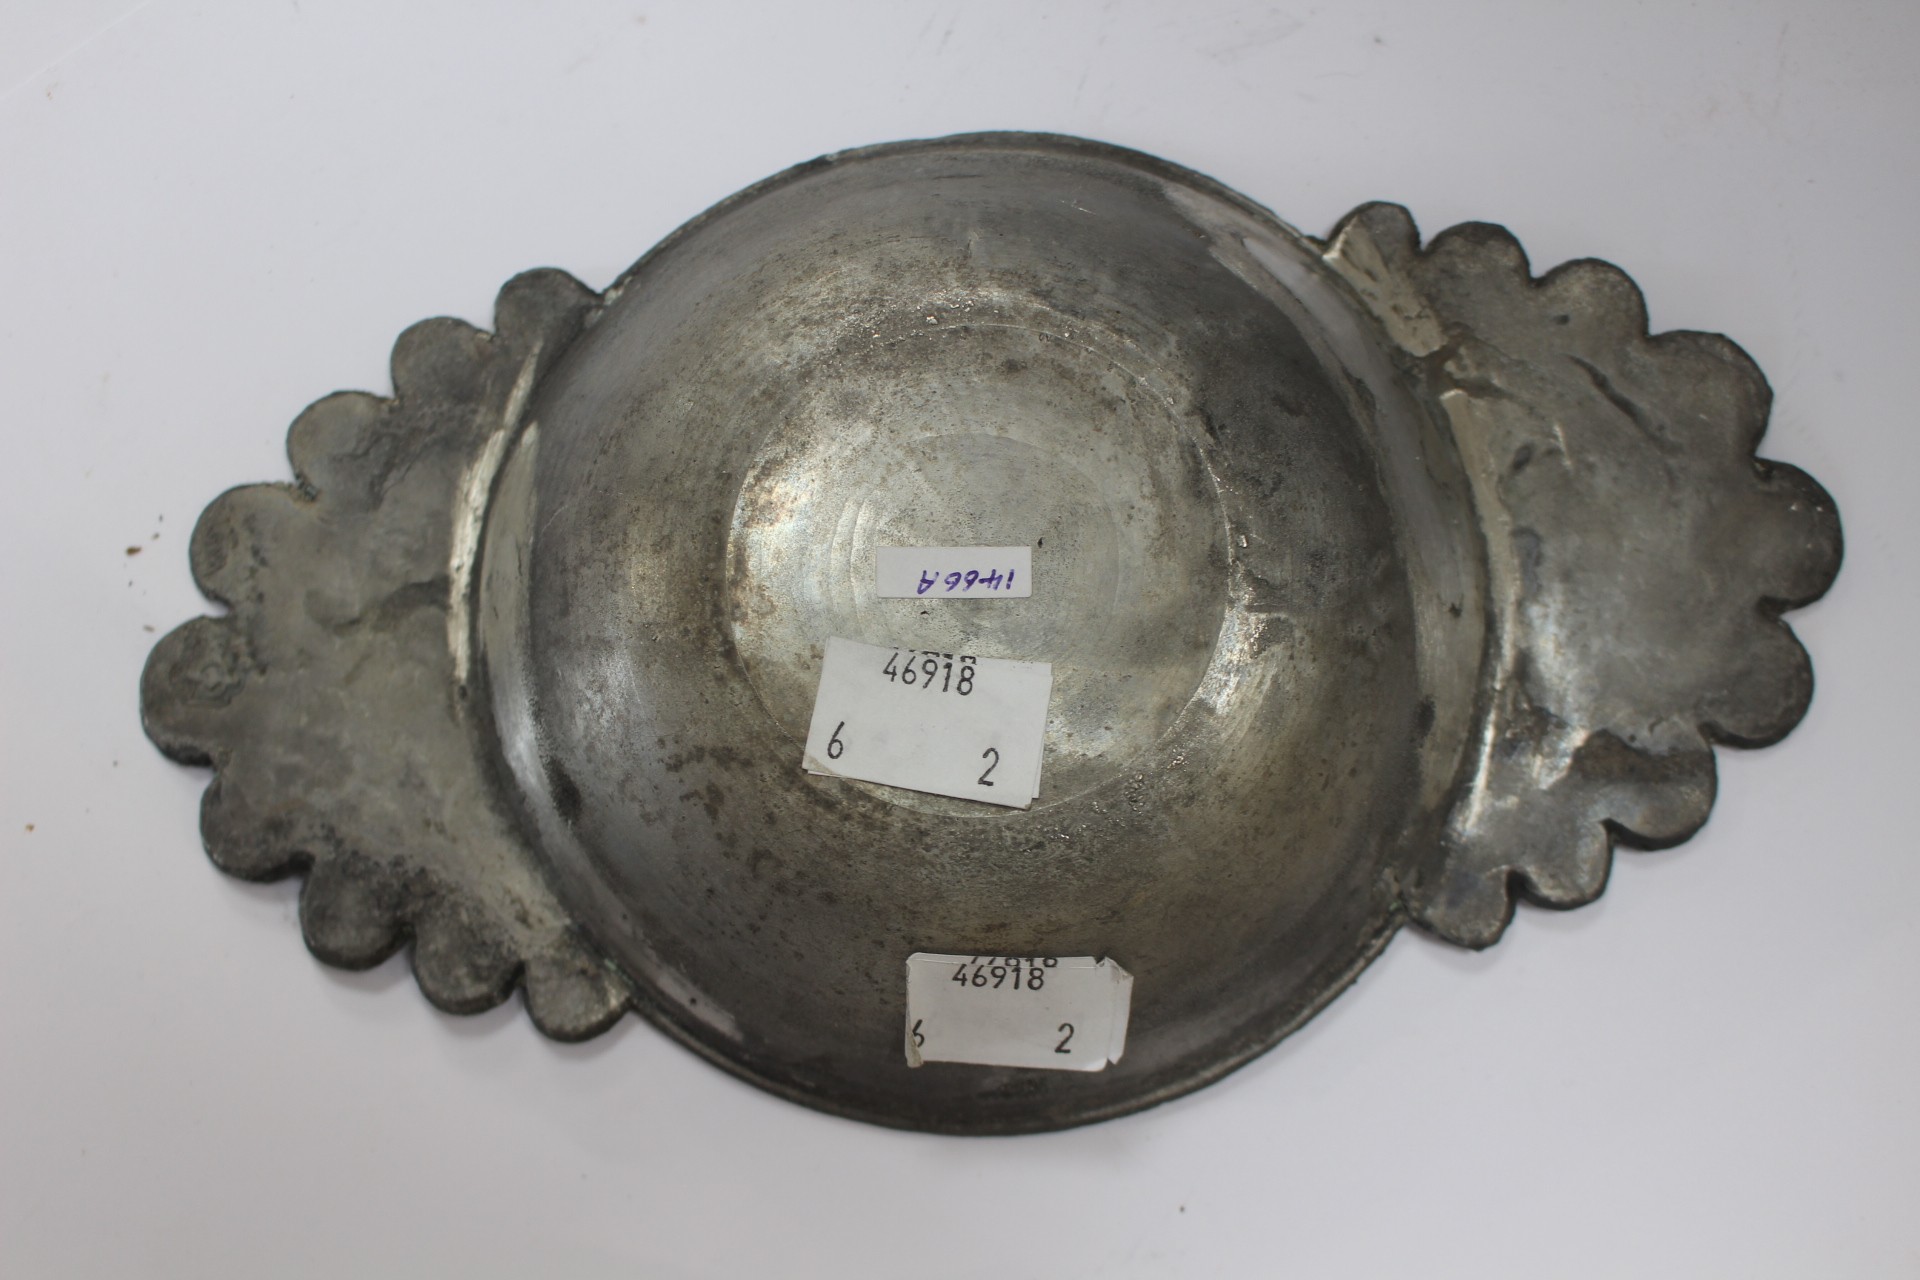 A pewter porringer from the Punta Cana wreck by 'ID' possibly John Day of London circa 3-1557, - Image 2 of 2